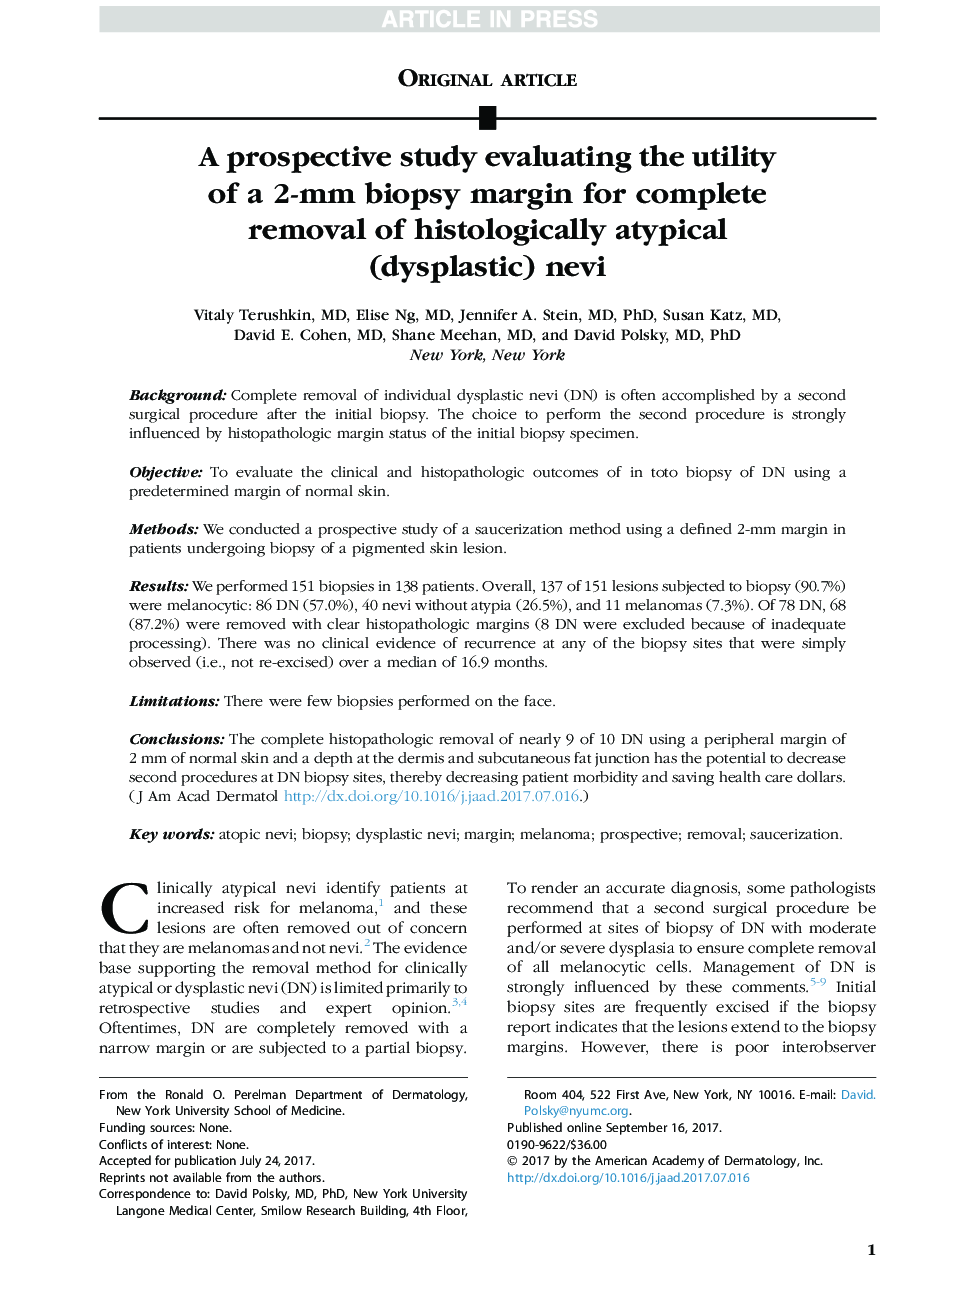 A prospective study evaluating the utility of a 2-mm biopsy margin for complete removal of histologically atypical (dysplastic) nevi